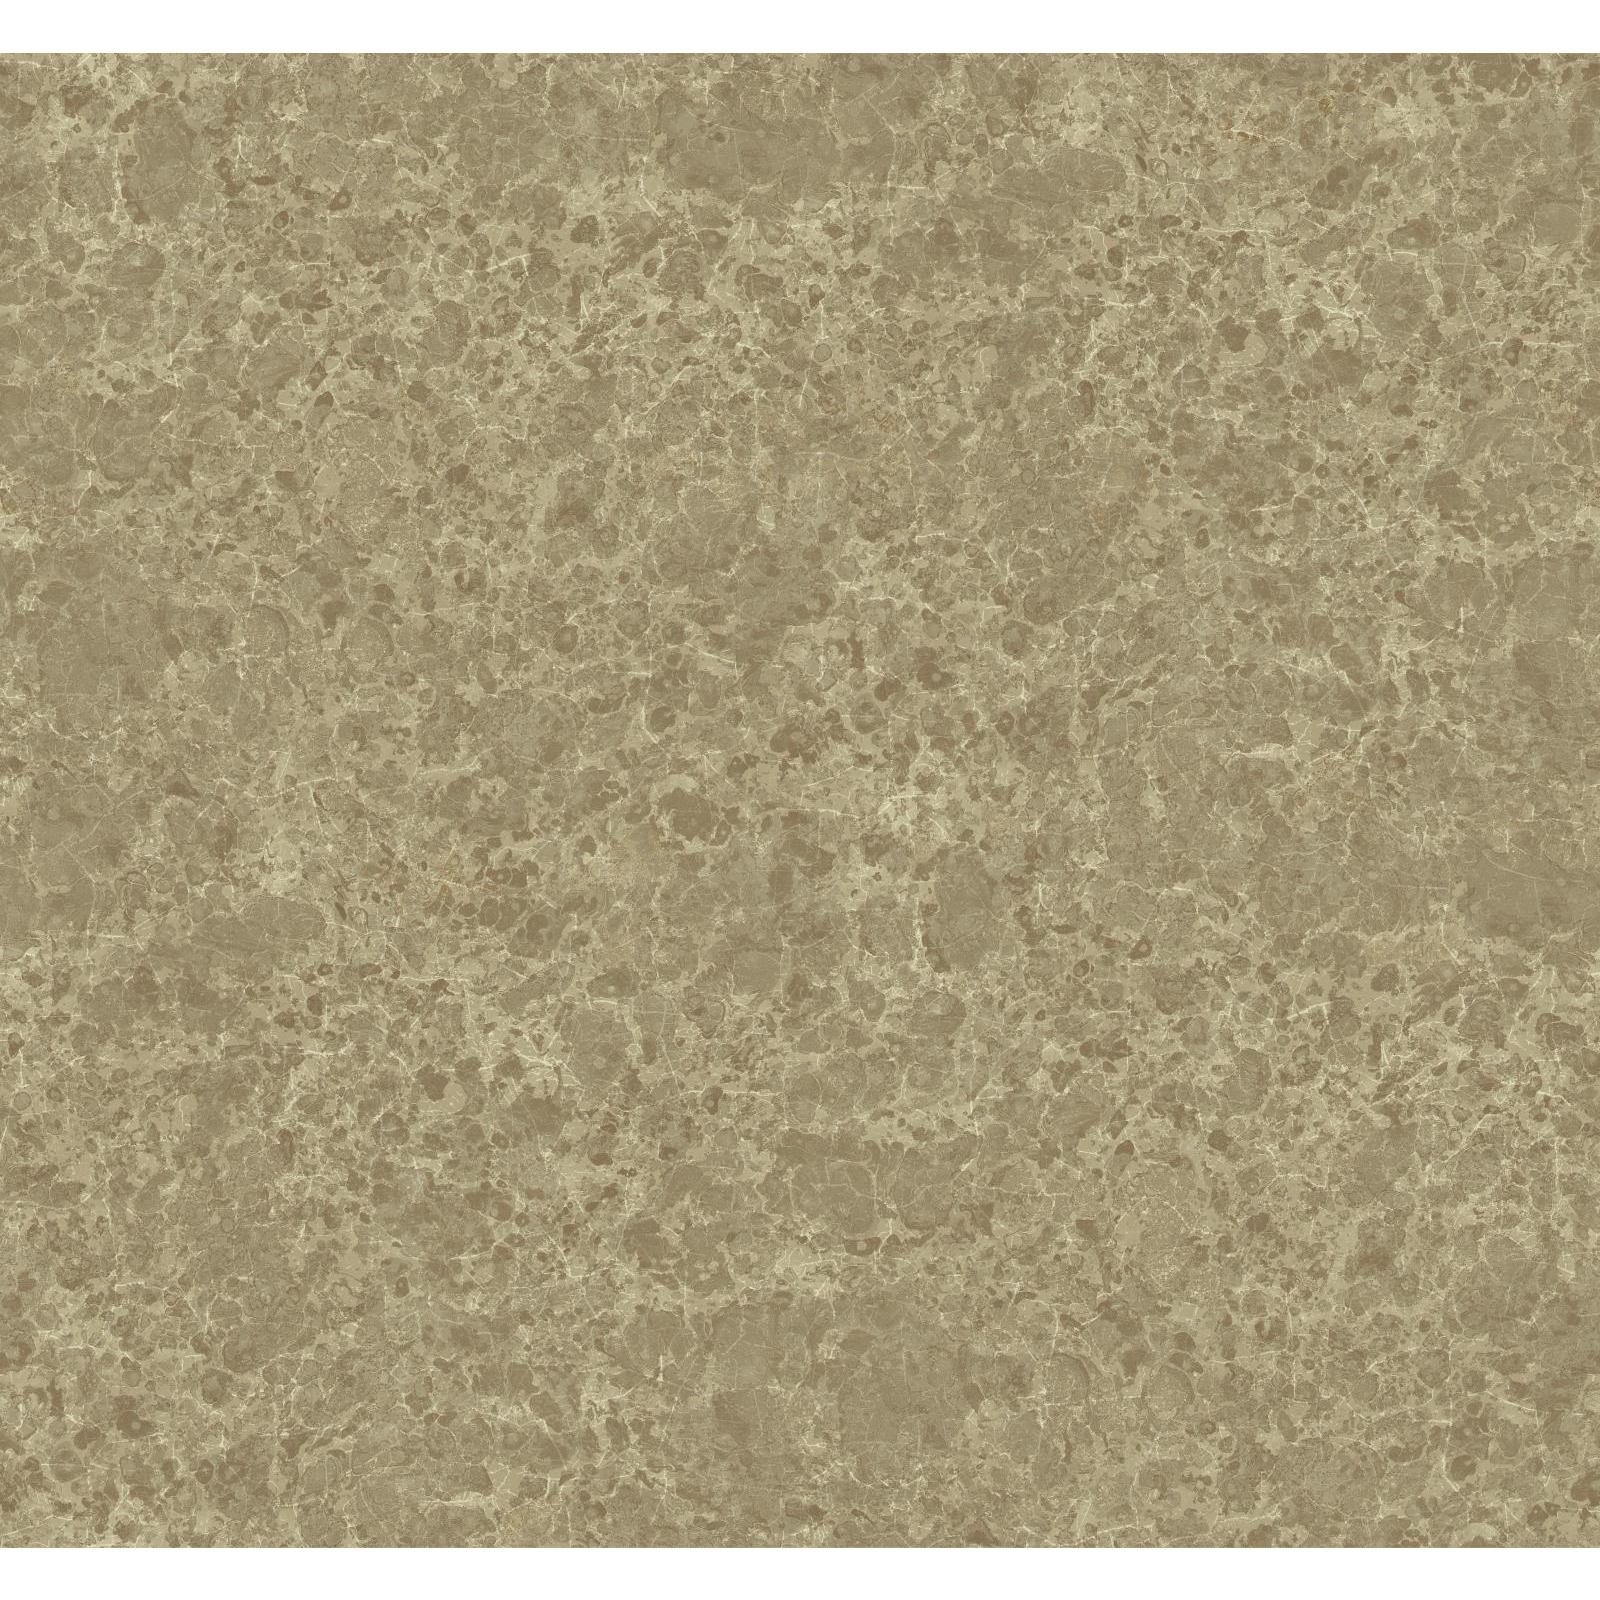 York Wallcoverings Gold Leaf Stone Marble Wallpaper